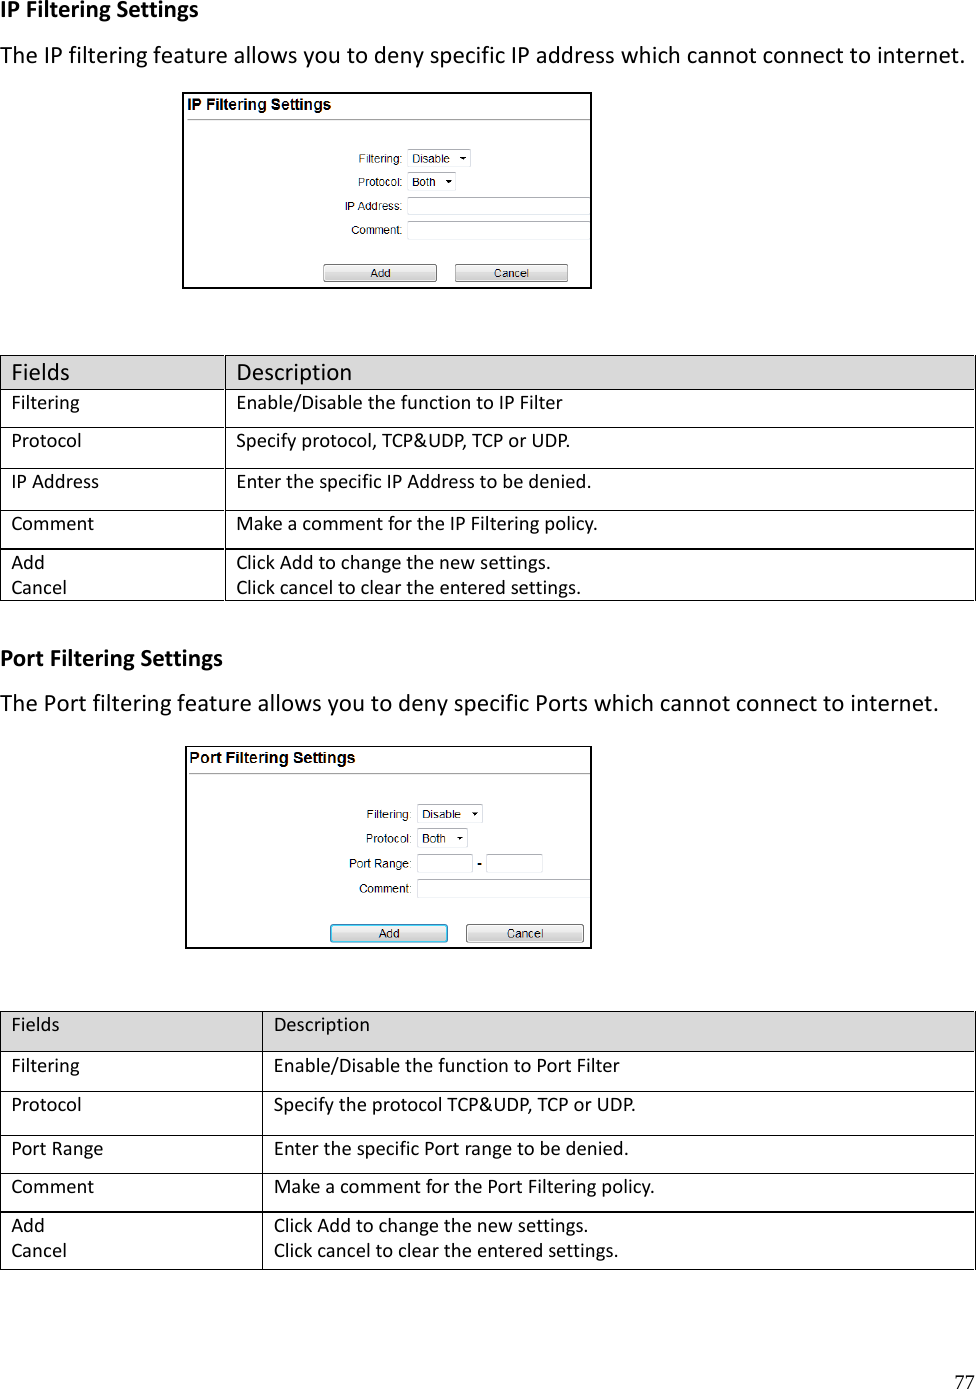 77  IP Filtering Settings The IP filtering feature allows you to deny specific IP address which cannot connect to internet.      Fields Description Filtering Enable/Disable the function to IP Filter Protocol Specify protocol, TCP&amp;UDP, TCP or UDP. IP Address Enter the specific IP Address to be denied. Comment Make a comment for the IP Filtering policy. Add Cancel Click Add to change the new settings. Click cancel to clear the entered settings.  Port Filtering Settings The Port filtering feature allows you to deny specific Ports which cannot connect to internet.       Fields Description Filtering Enable/Disable the function to Port Filter Protocol Specify the protocol TCP&amp;UDP, TCP or UDP. Port Range Enter the specific Port range to be denied. Comment Make a comment for the Port Filtering policy. Add Cancel Click Add to change the new settings. Click cancel to clear the entered settings.   